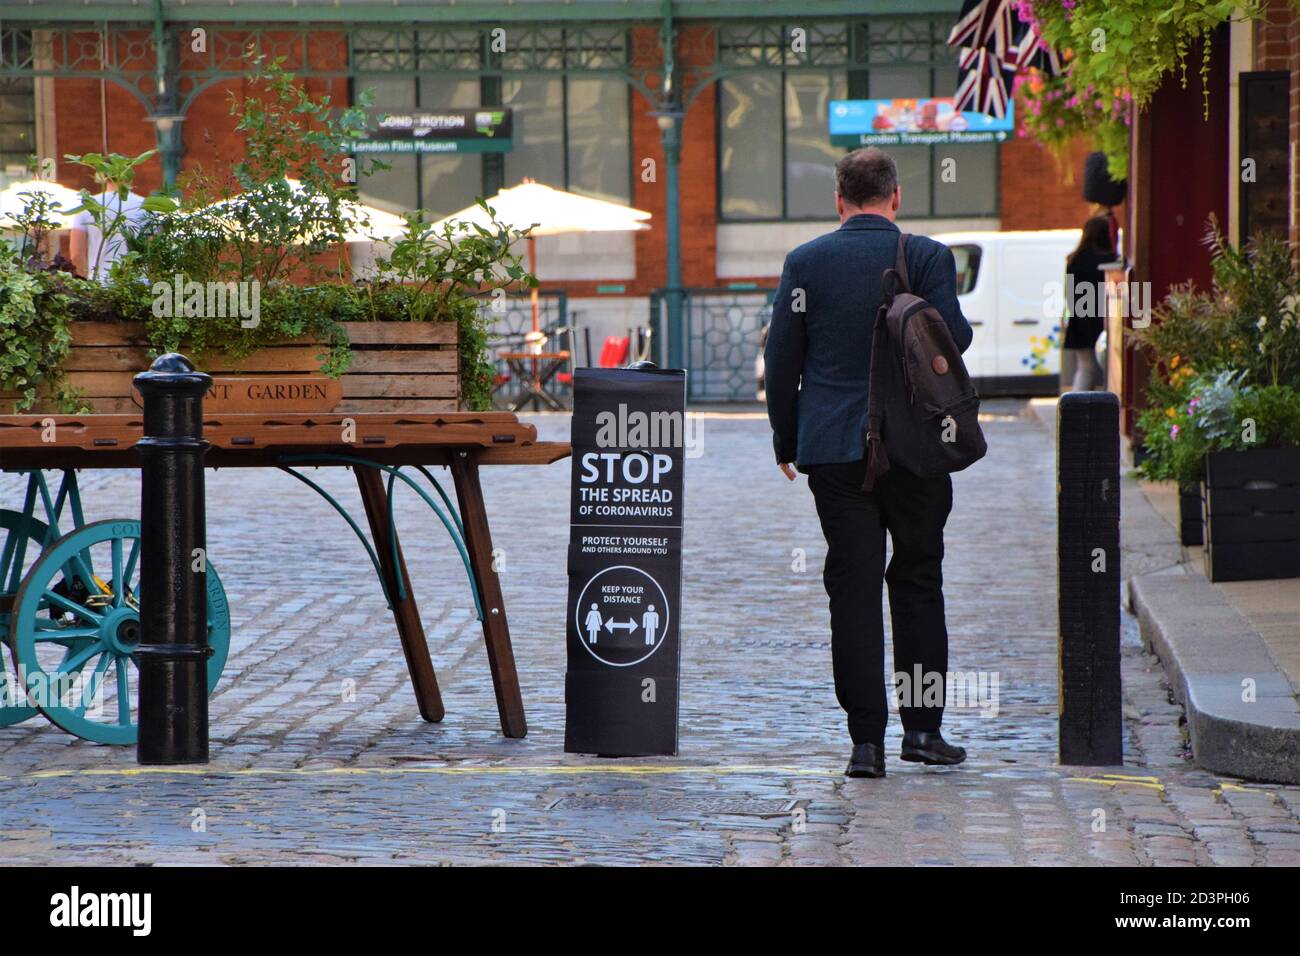 A man walks past a Stop The Spread of Coronavirus street sign in Covent Garden, London, 2020. Signs have been placed all around Covent Garden streets and market to encourage social distancing. Stock Photo